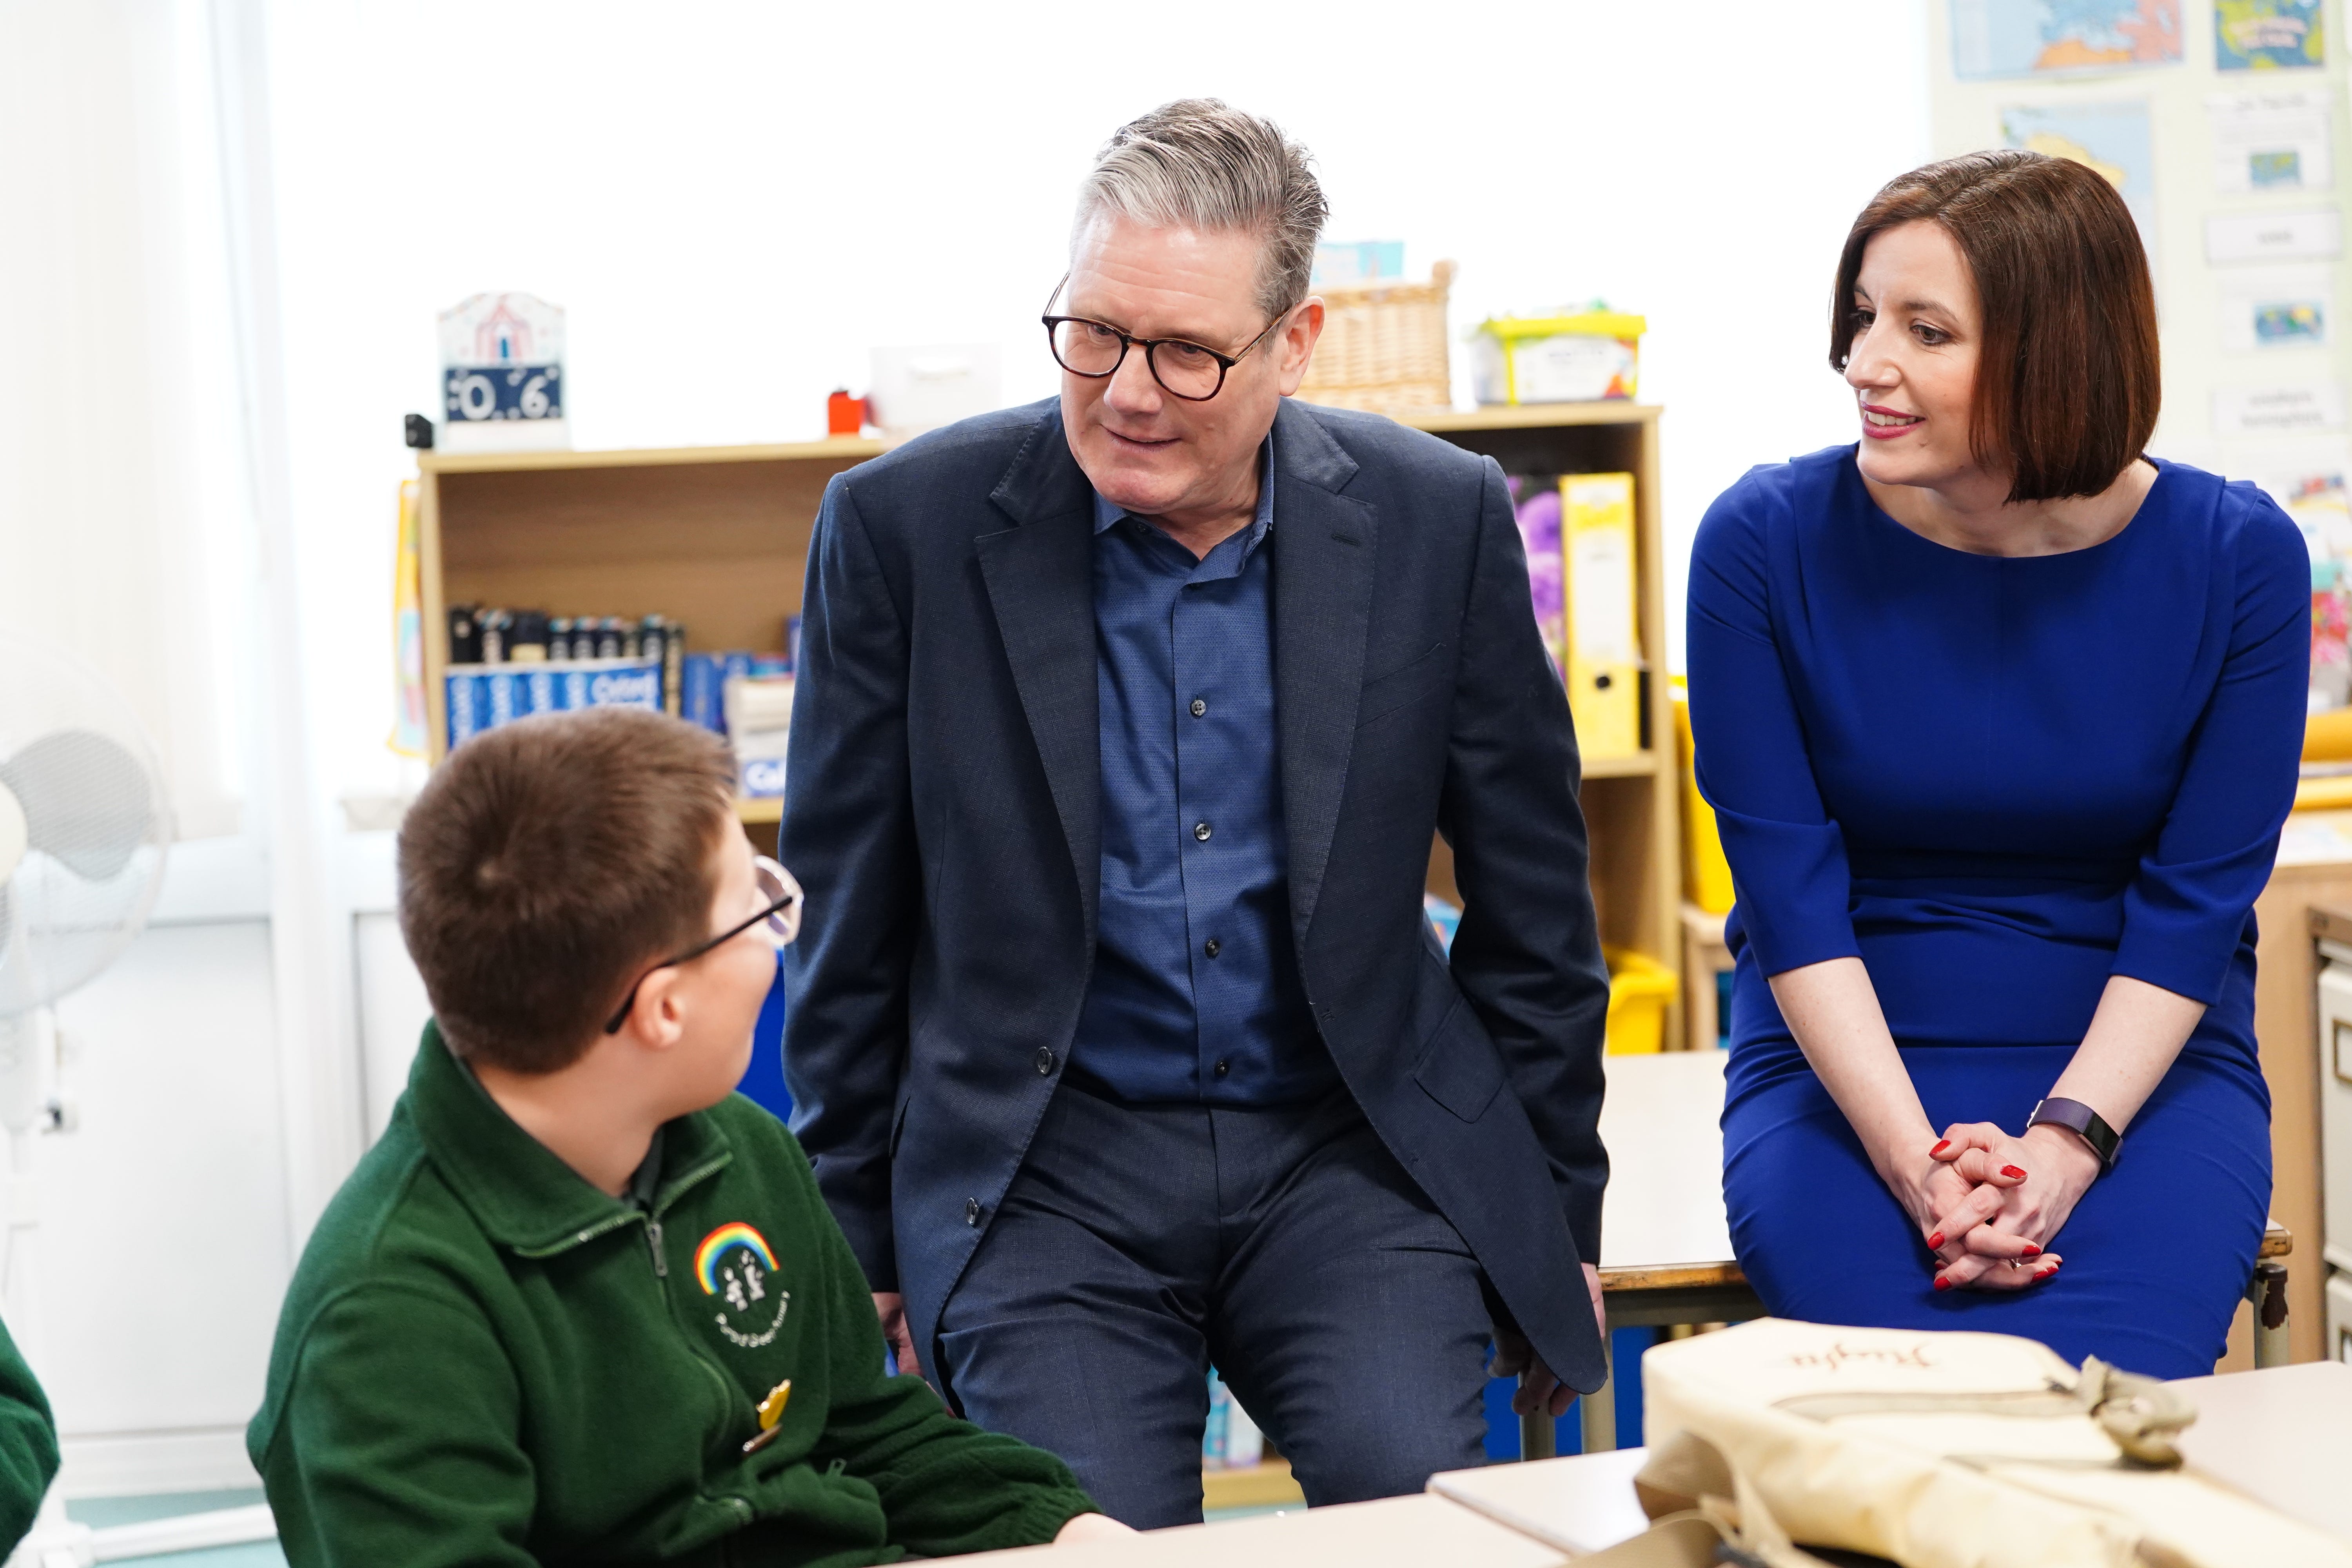 Sir Keir Starmer and shadow education secretary Bridget Phillipson during a visit to a school in Harlow in Essex